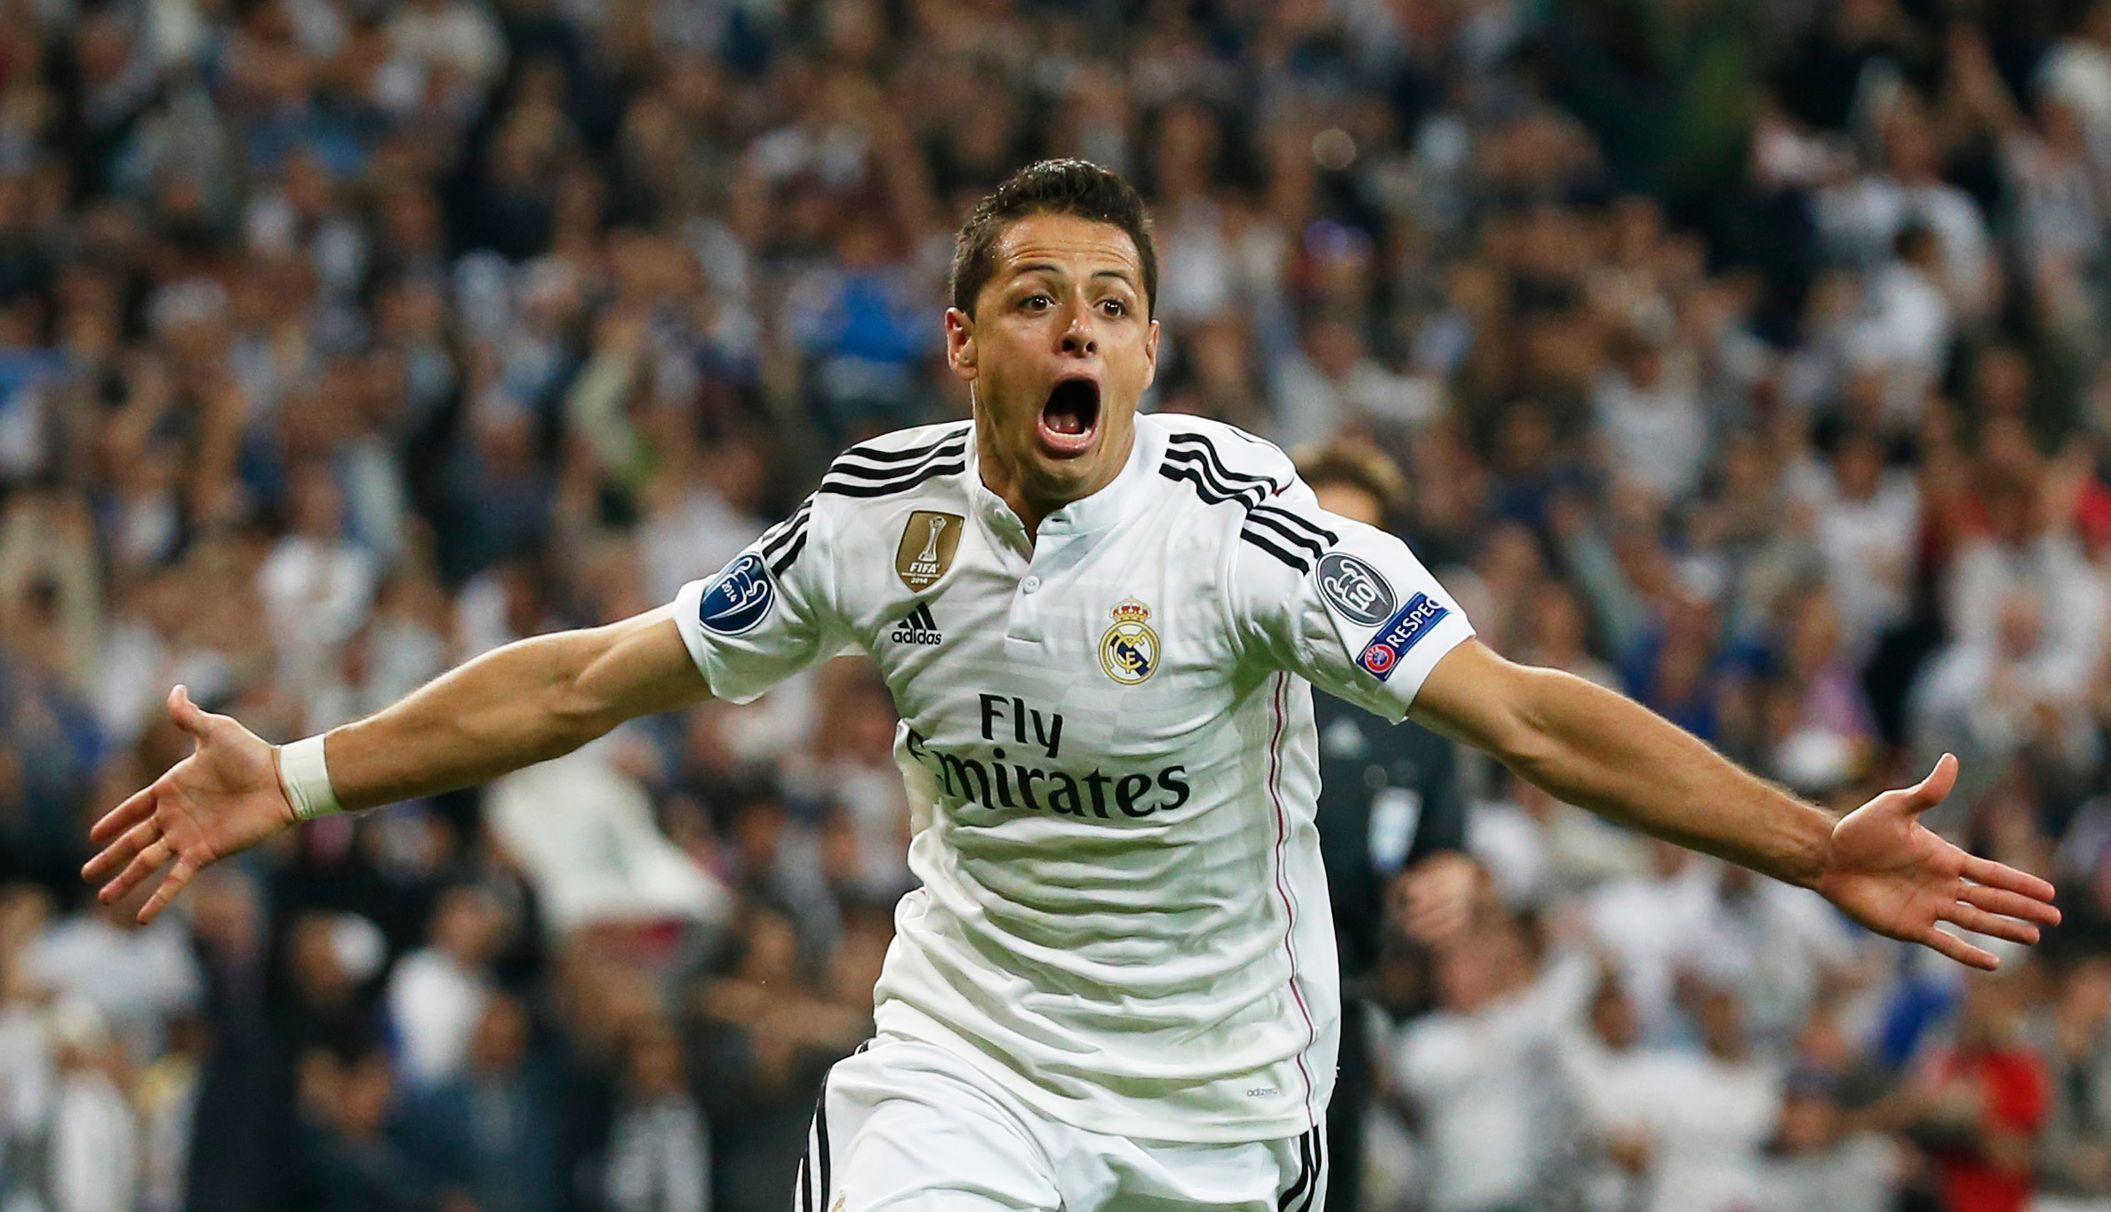 Football: Javier Hernandez celebrates after scoring the first goal for Real Madrid